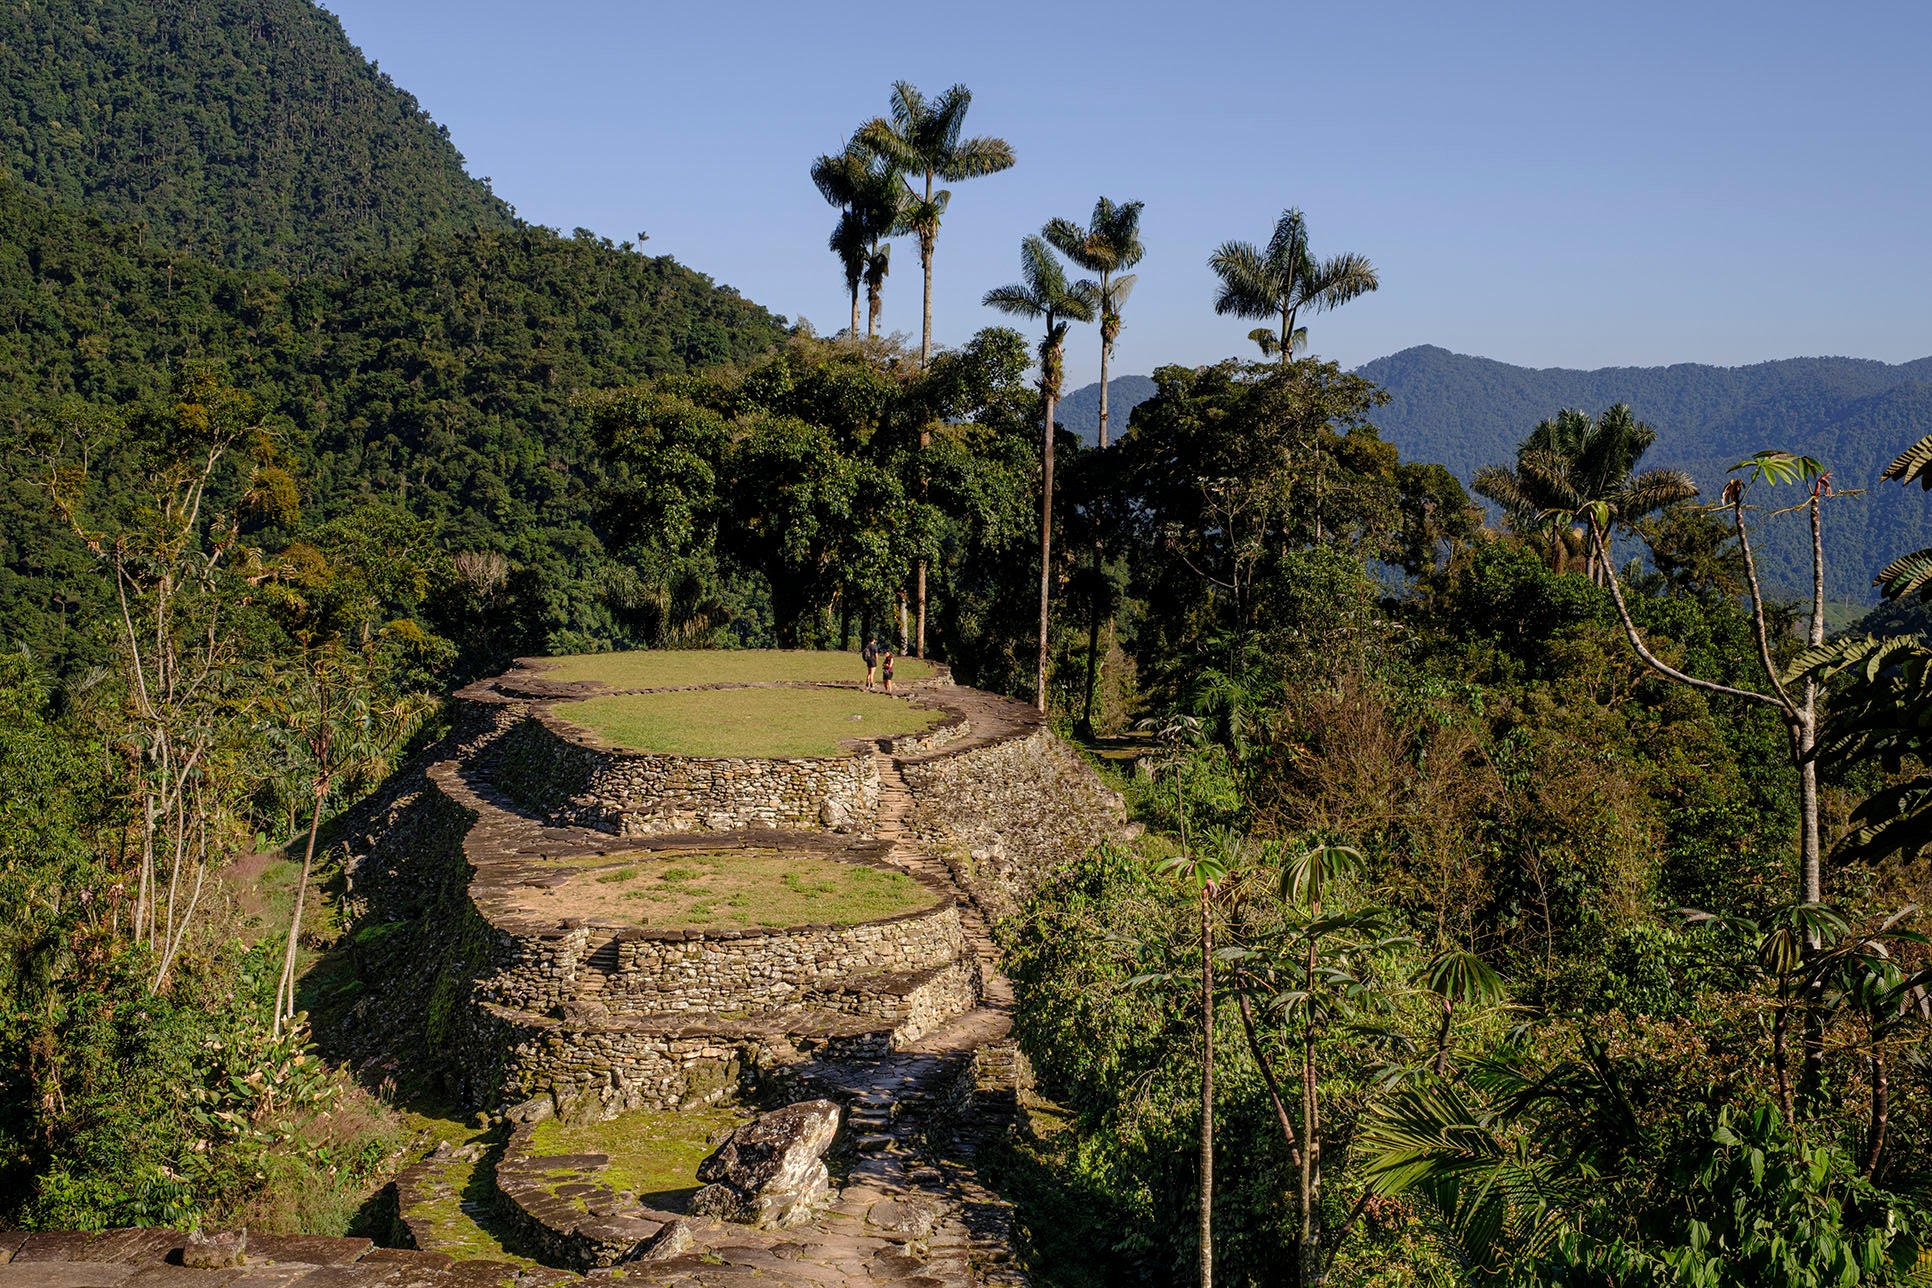 Ciudad Perdida was ‘rediscovered’ by the outside world in the 1970s